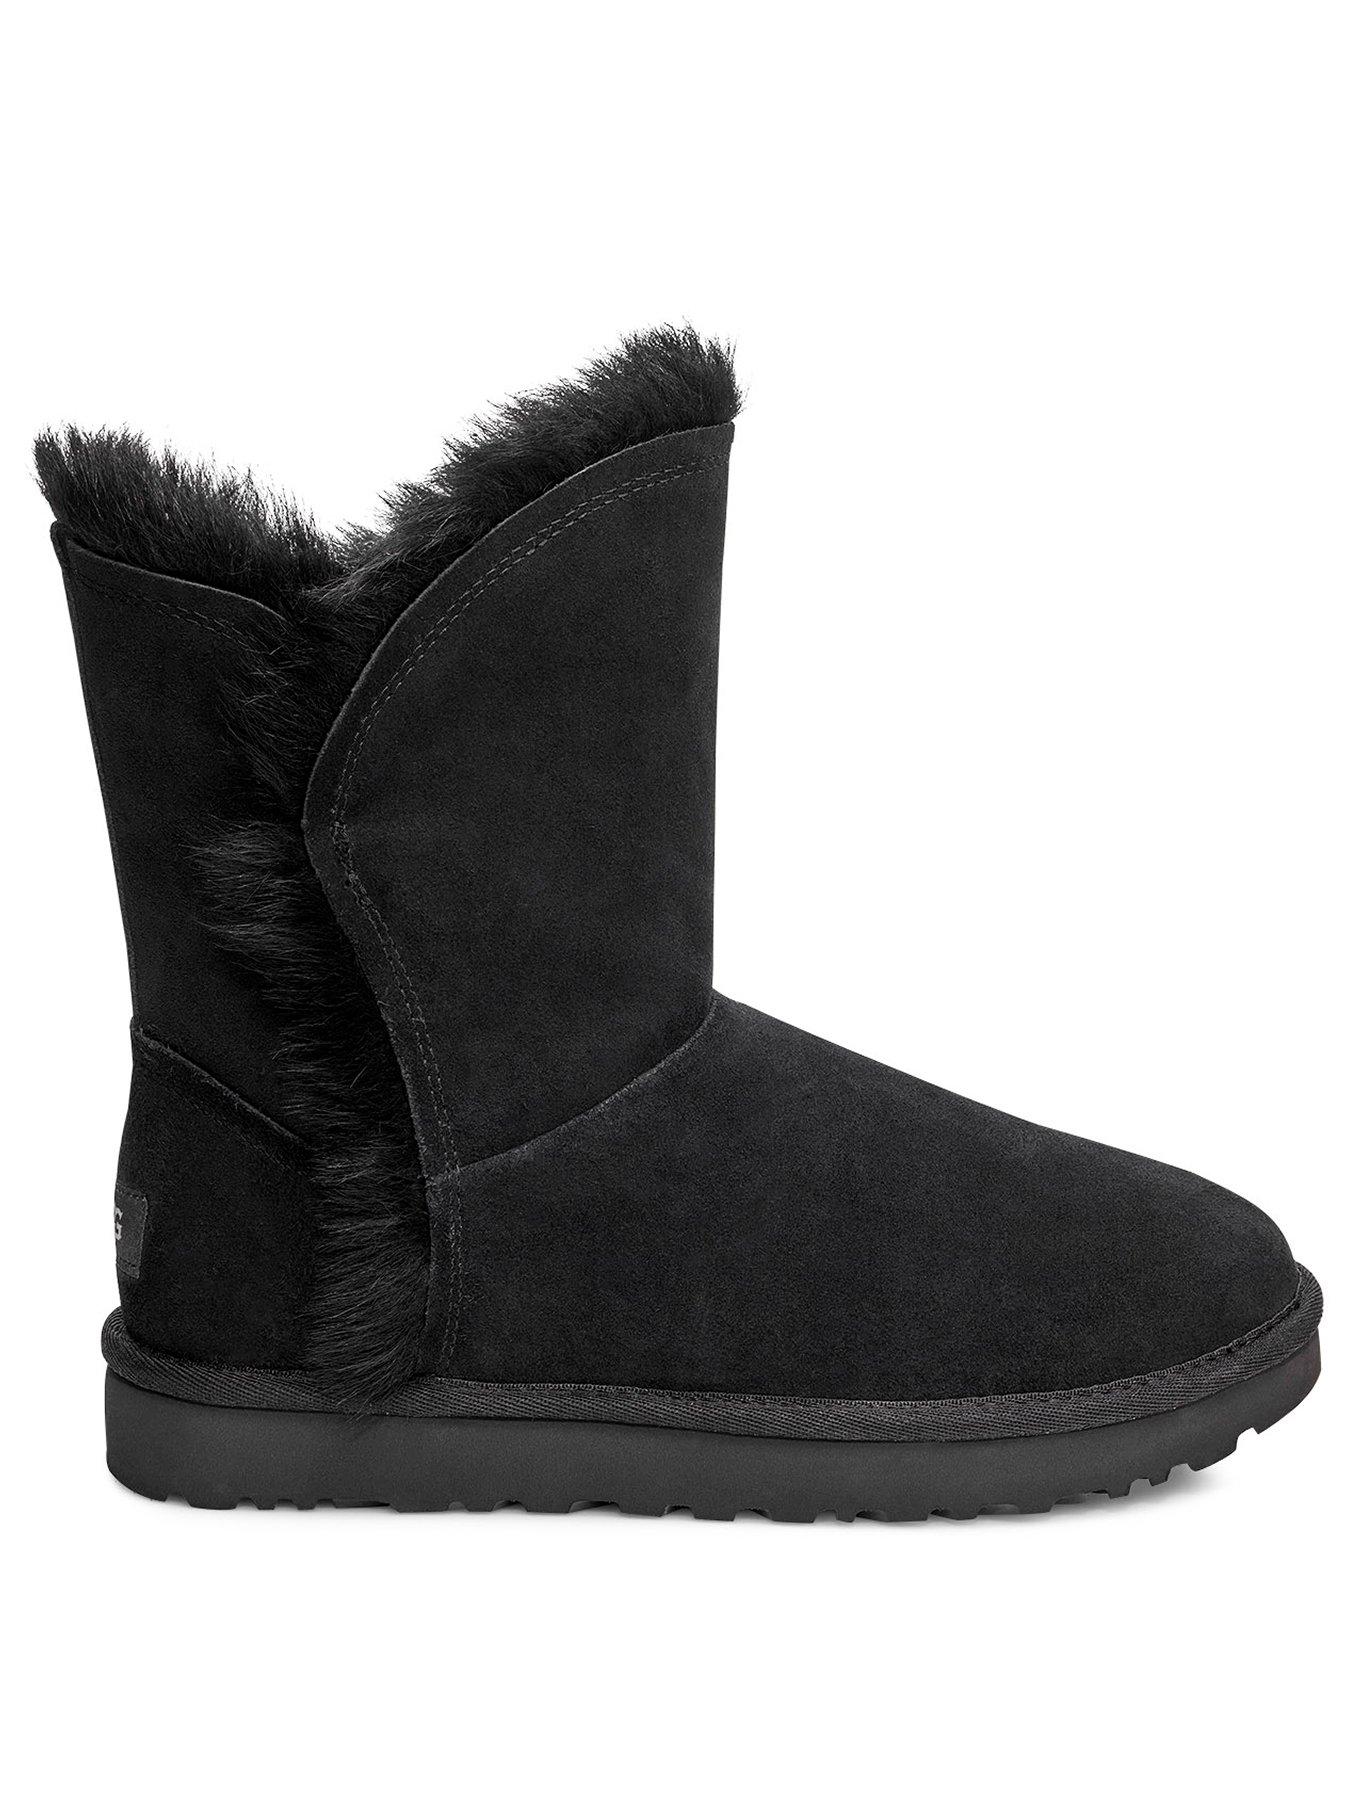 black low ugg boots